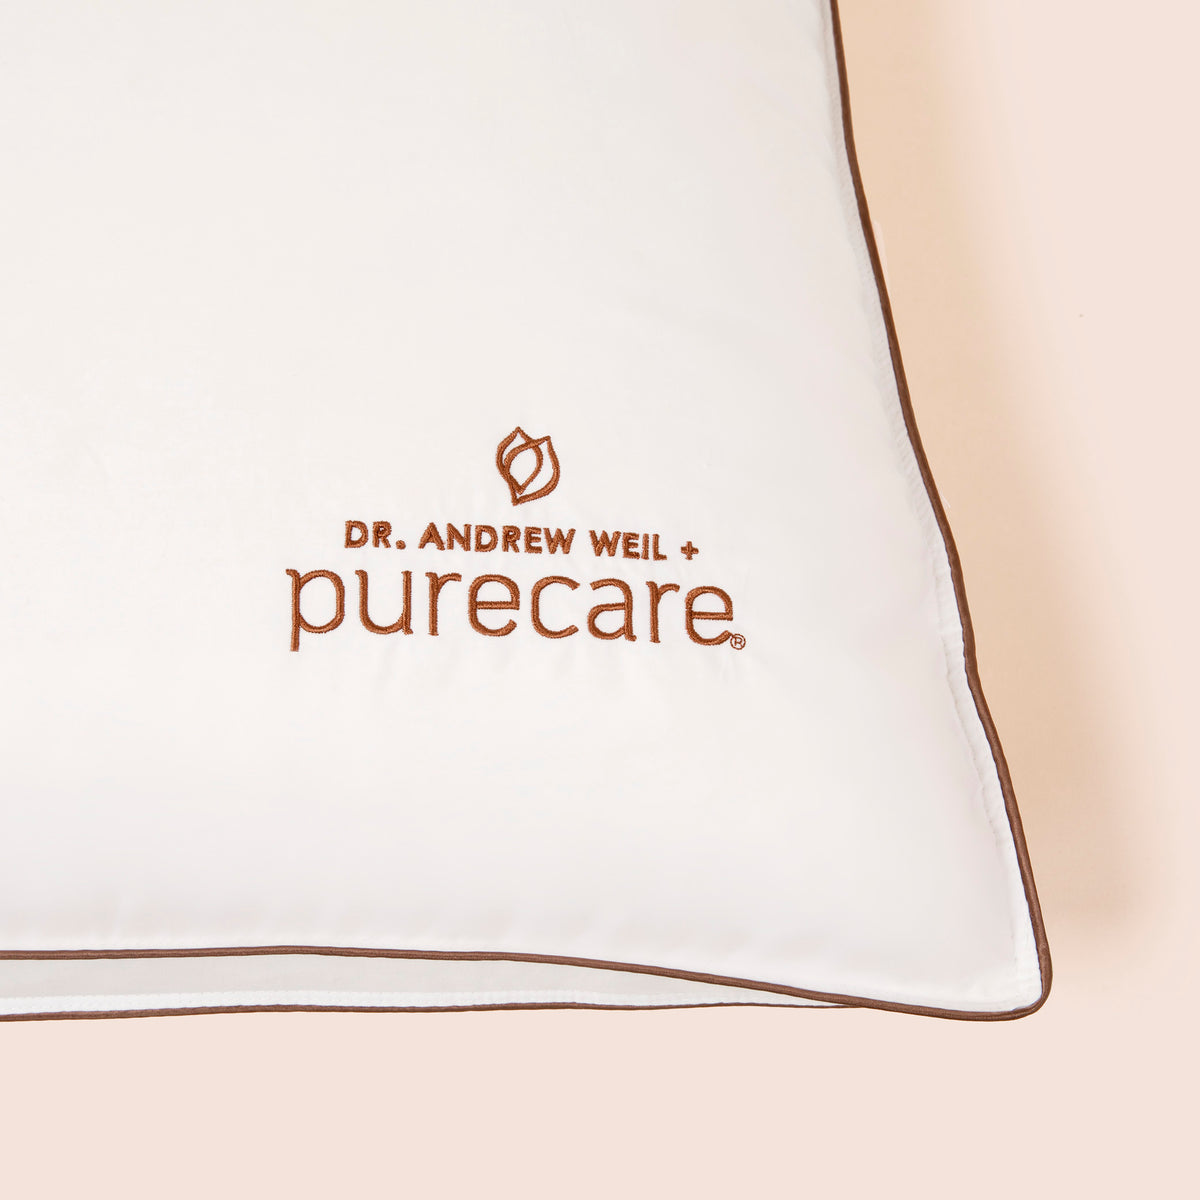 Close-up image of the Dr. Andrew Weil + Purecare logo on bottom right corner of Chambered Down Pillow